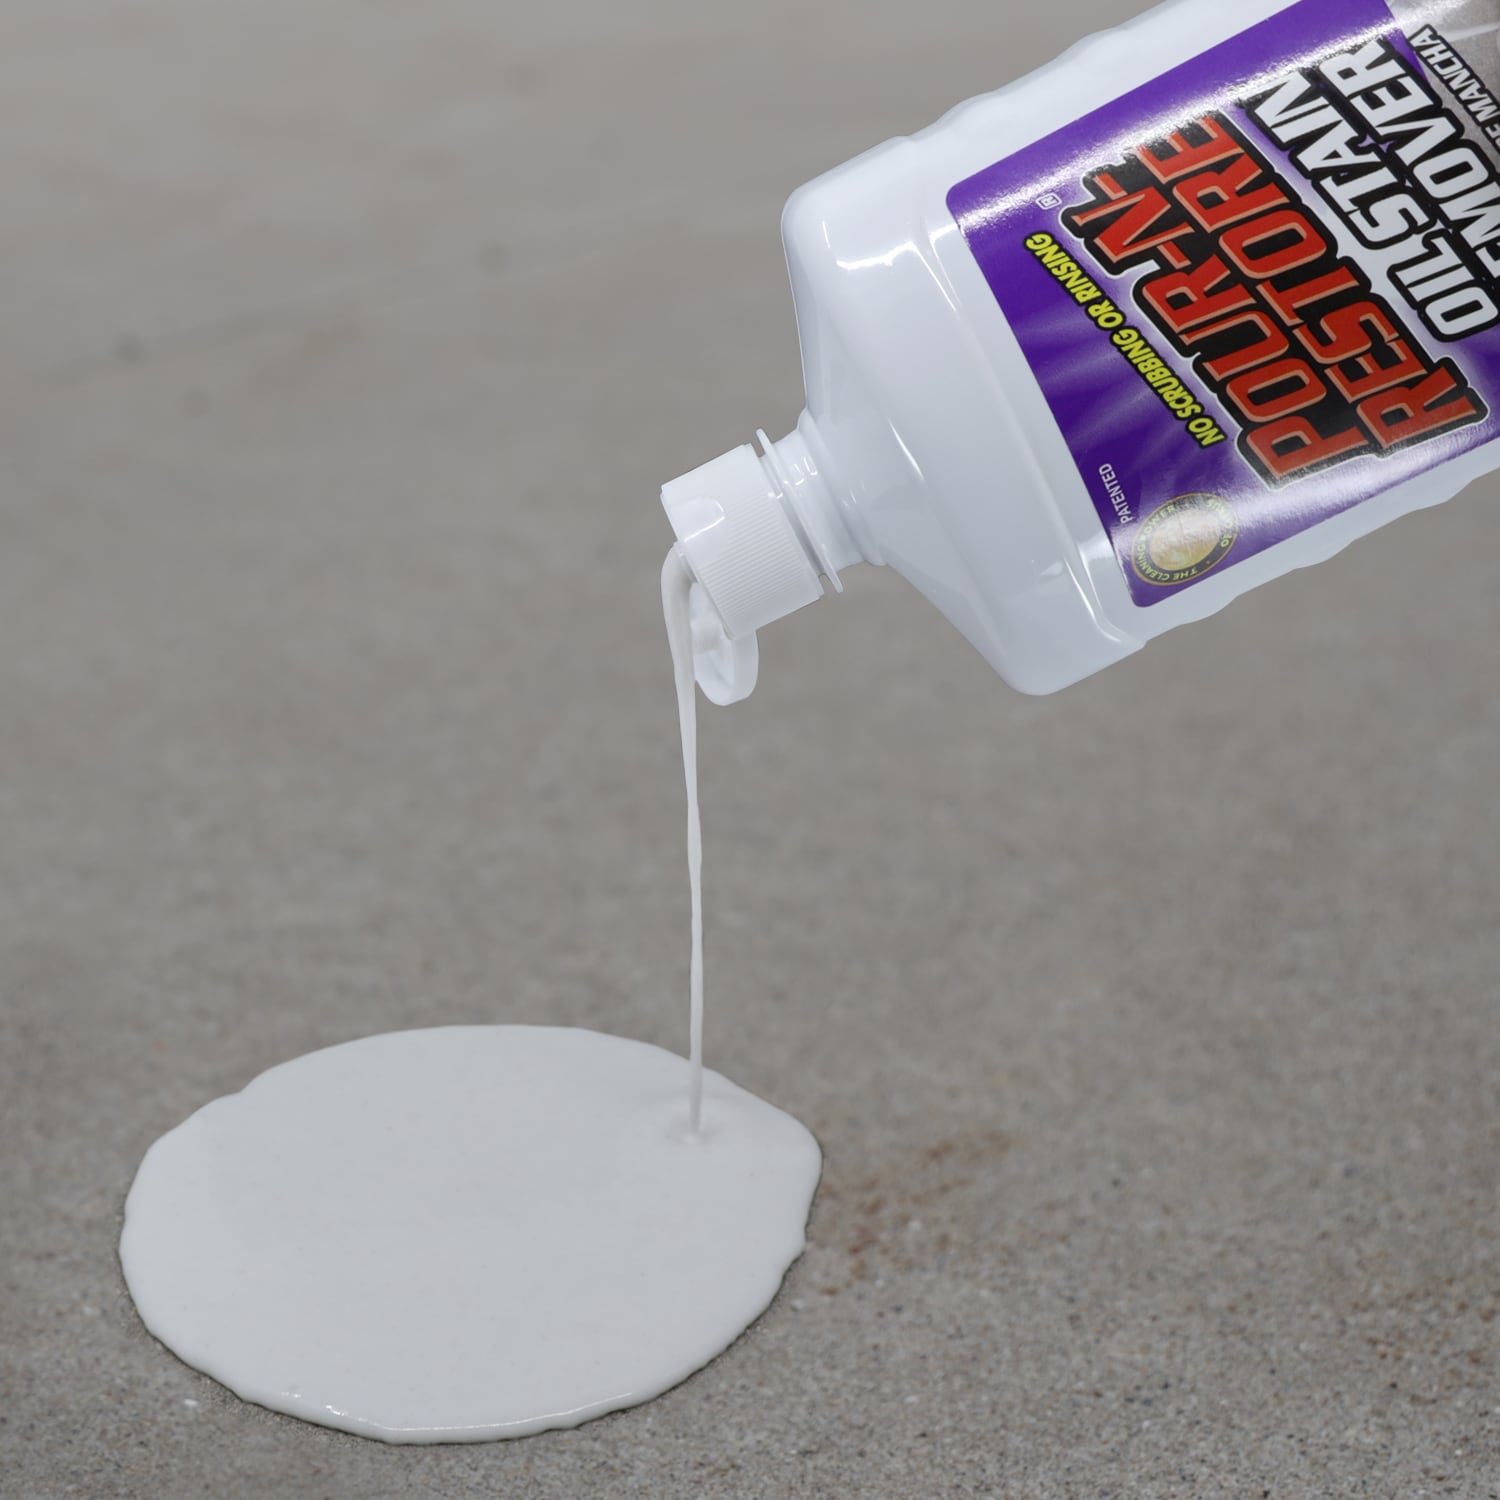 Smart 'n Easy™ Concrete Oil, Grease, & Stain Remover – Dumond